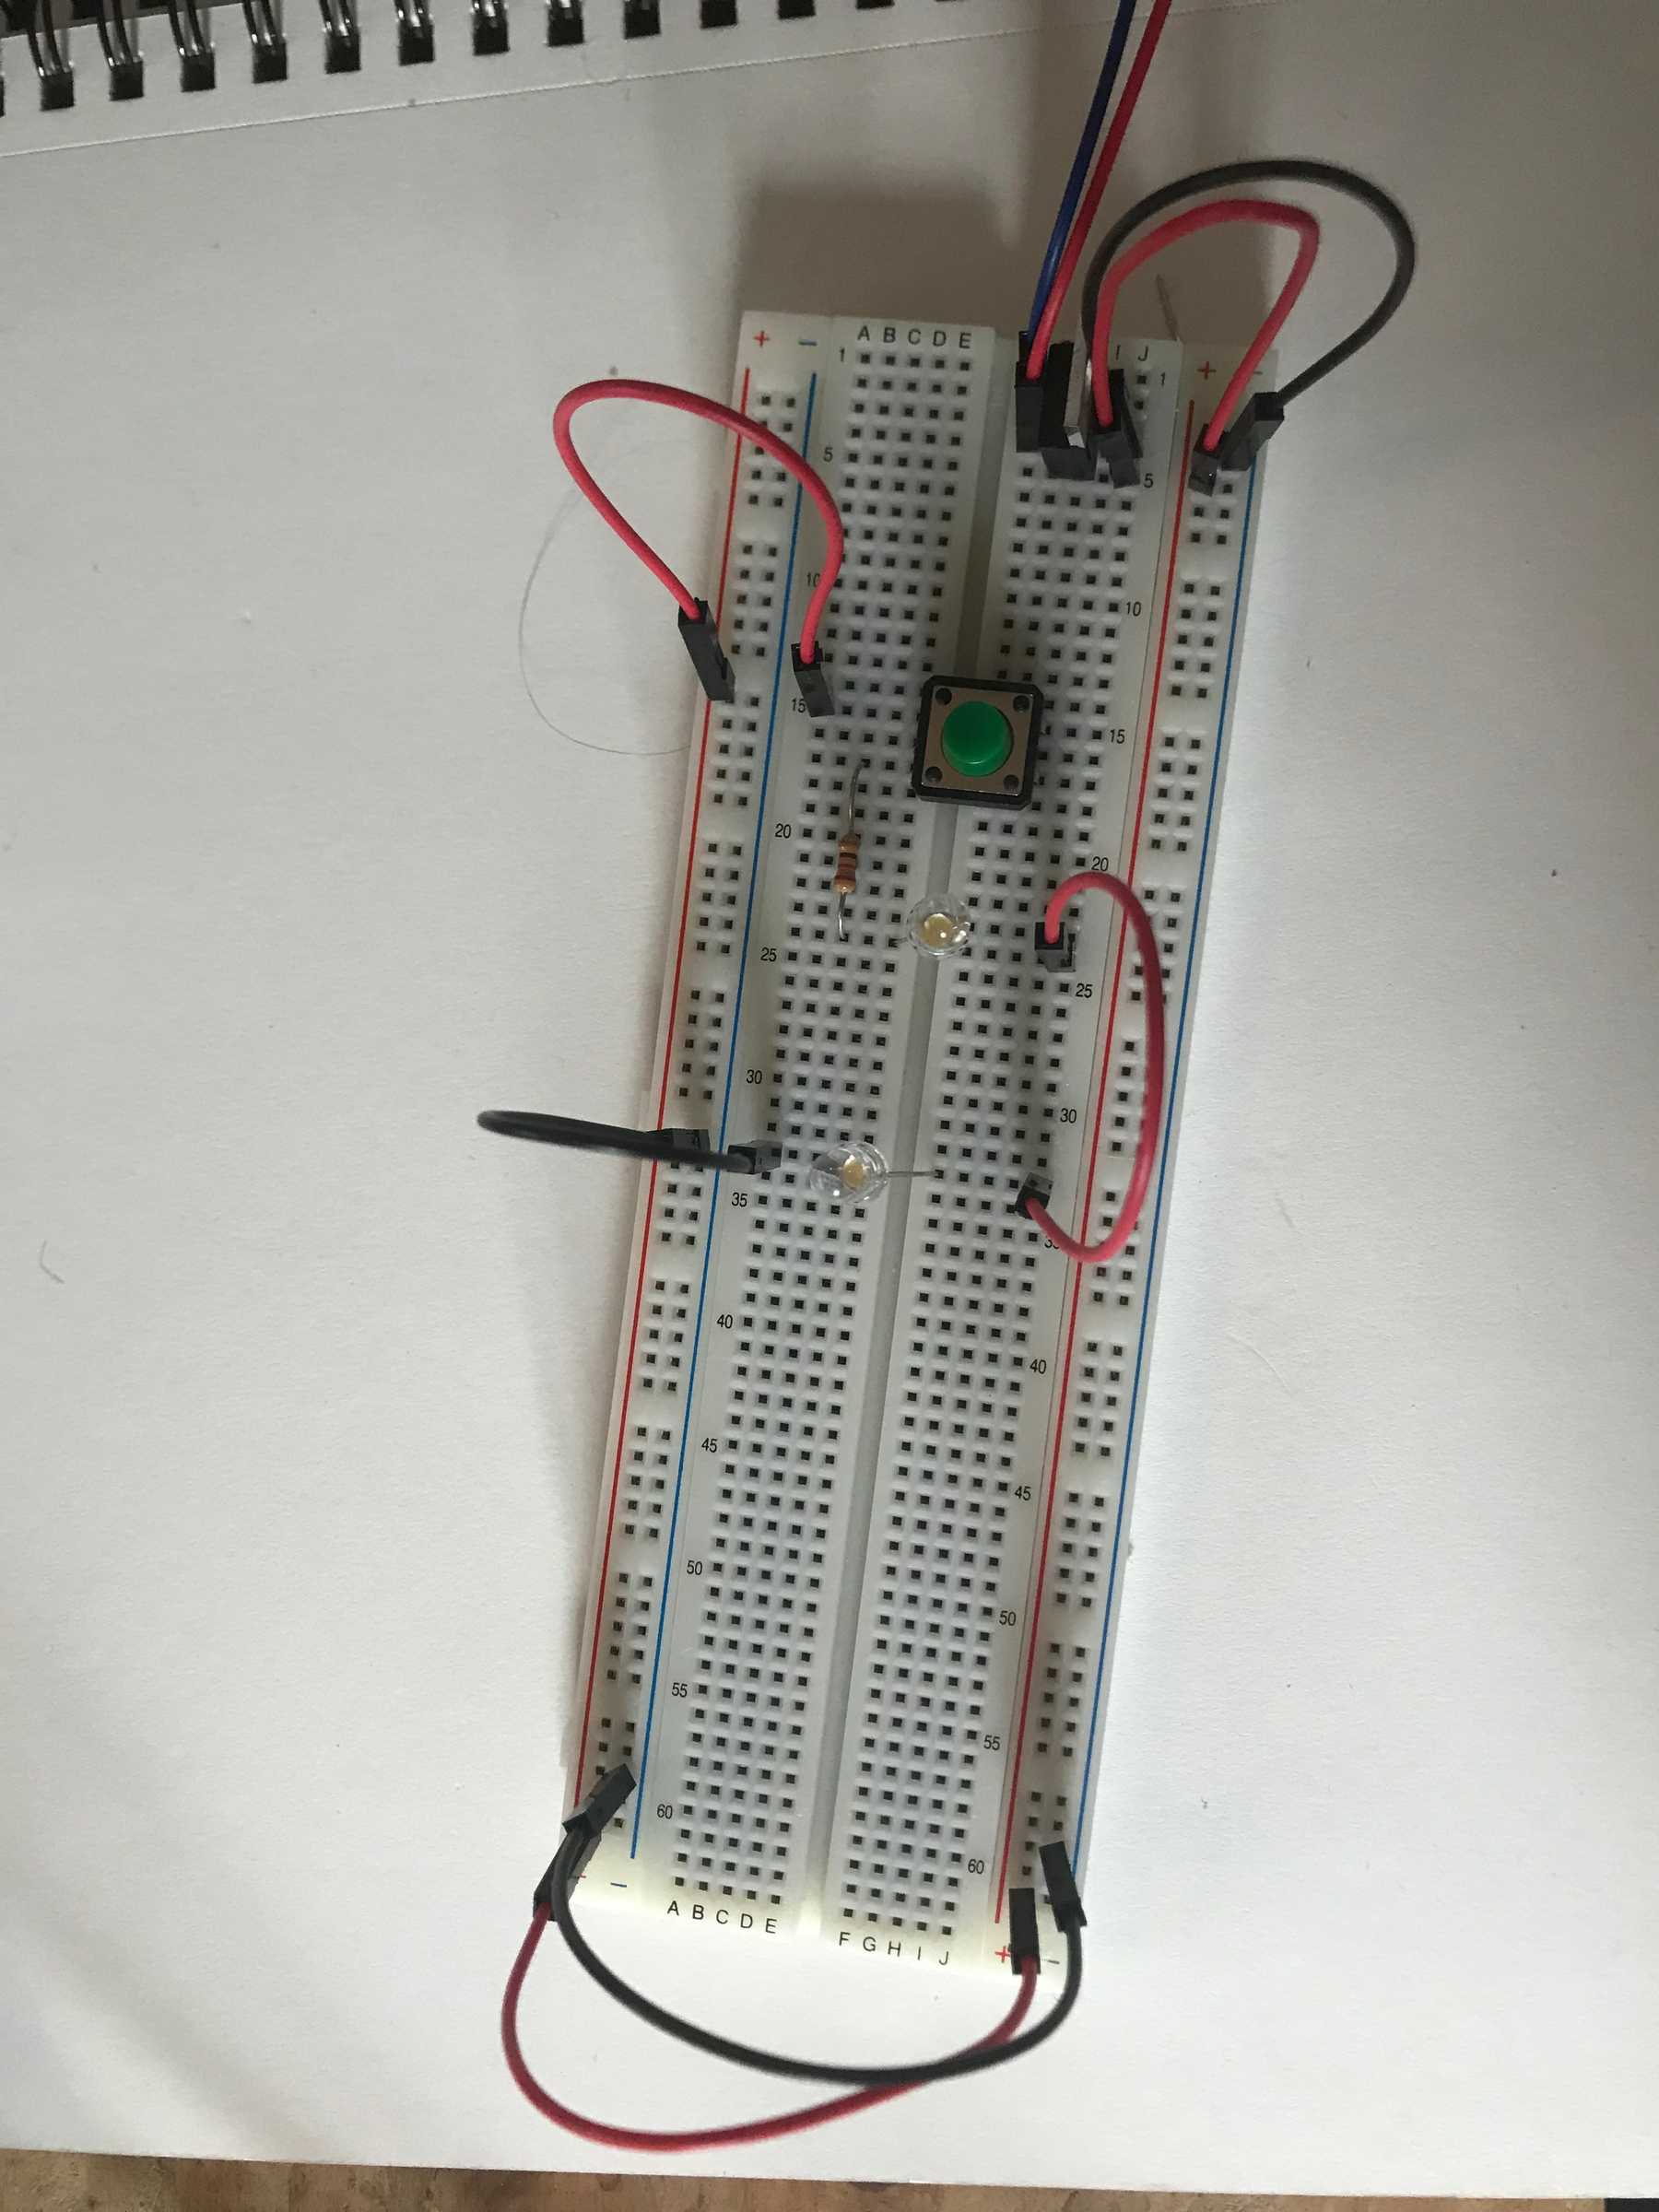 The circuit with a second LED